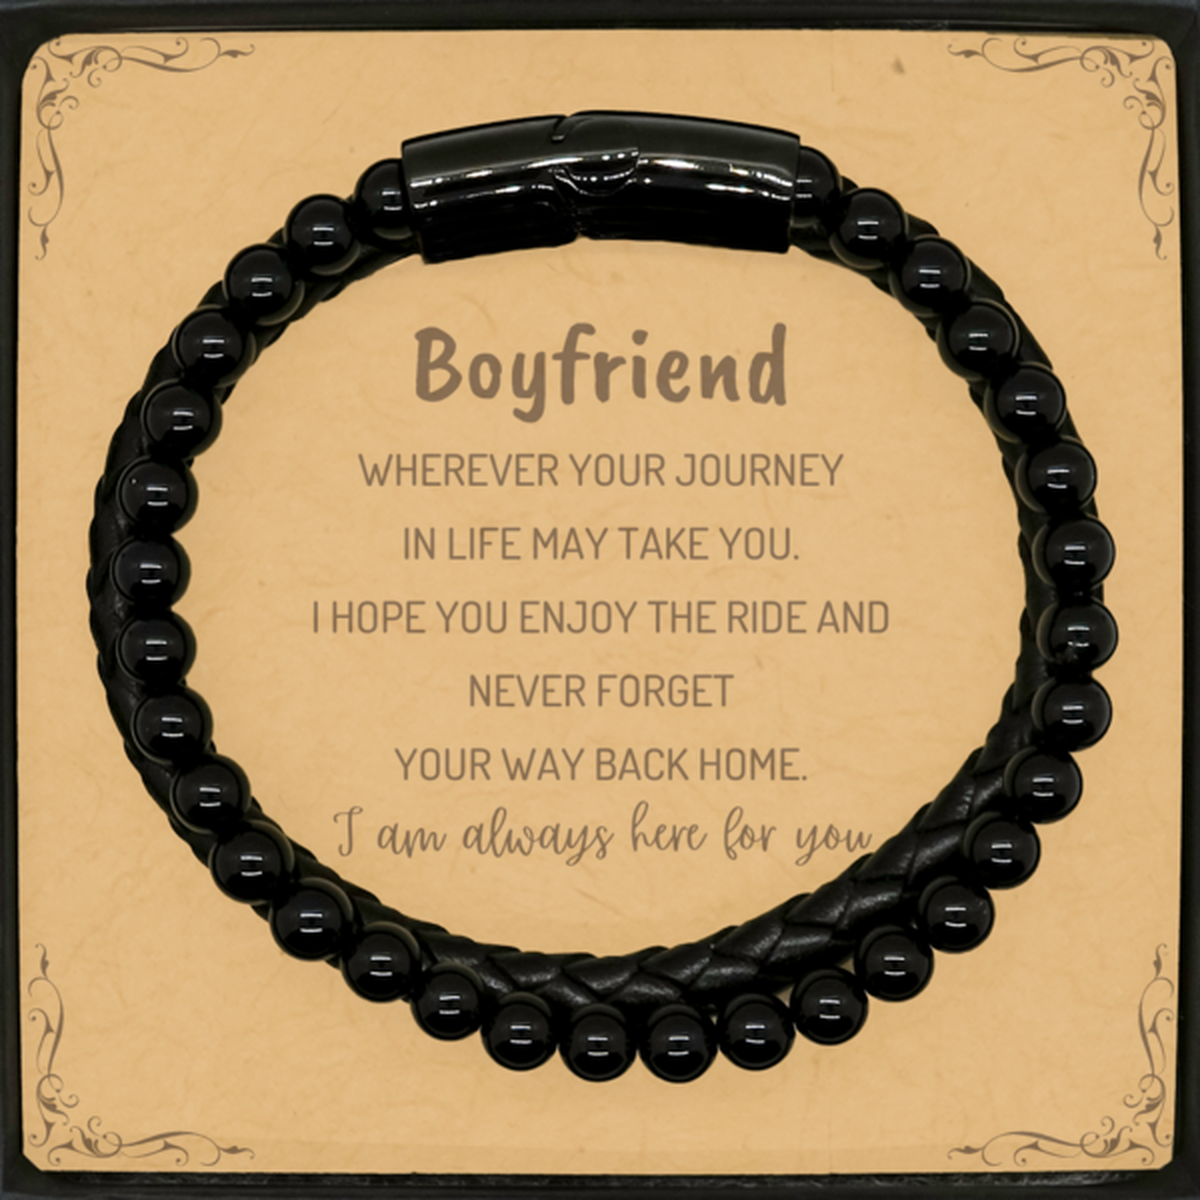 Boyfriend wherever your journey in life may take you, I am always here for you Boyfriend Stone Leather Bracelets, Awesome Christmas Gifts For Boyfriend Message Card, Boyfriend Birthday Gifts for Men Women Family Loved One